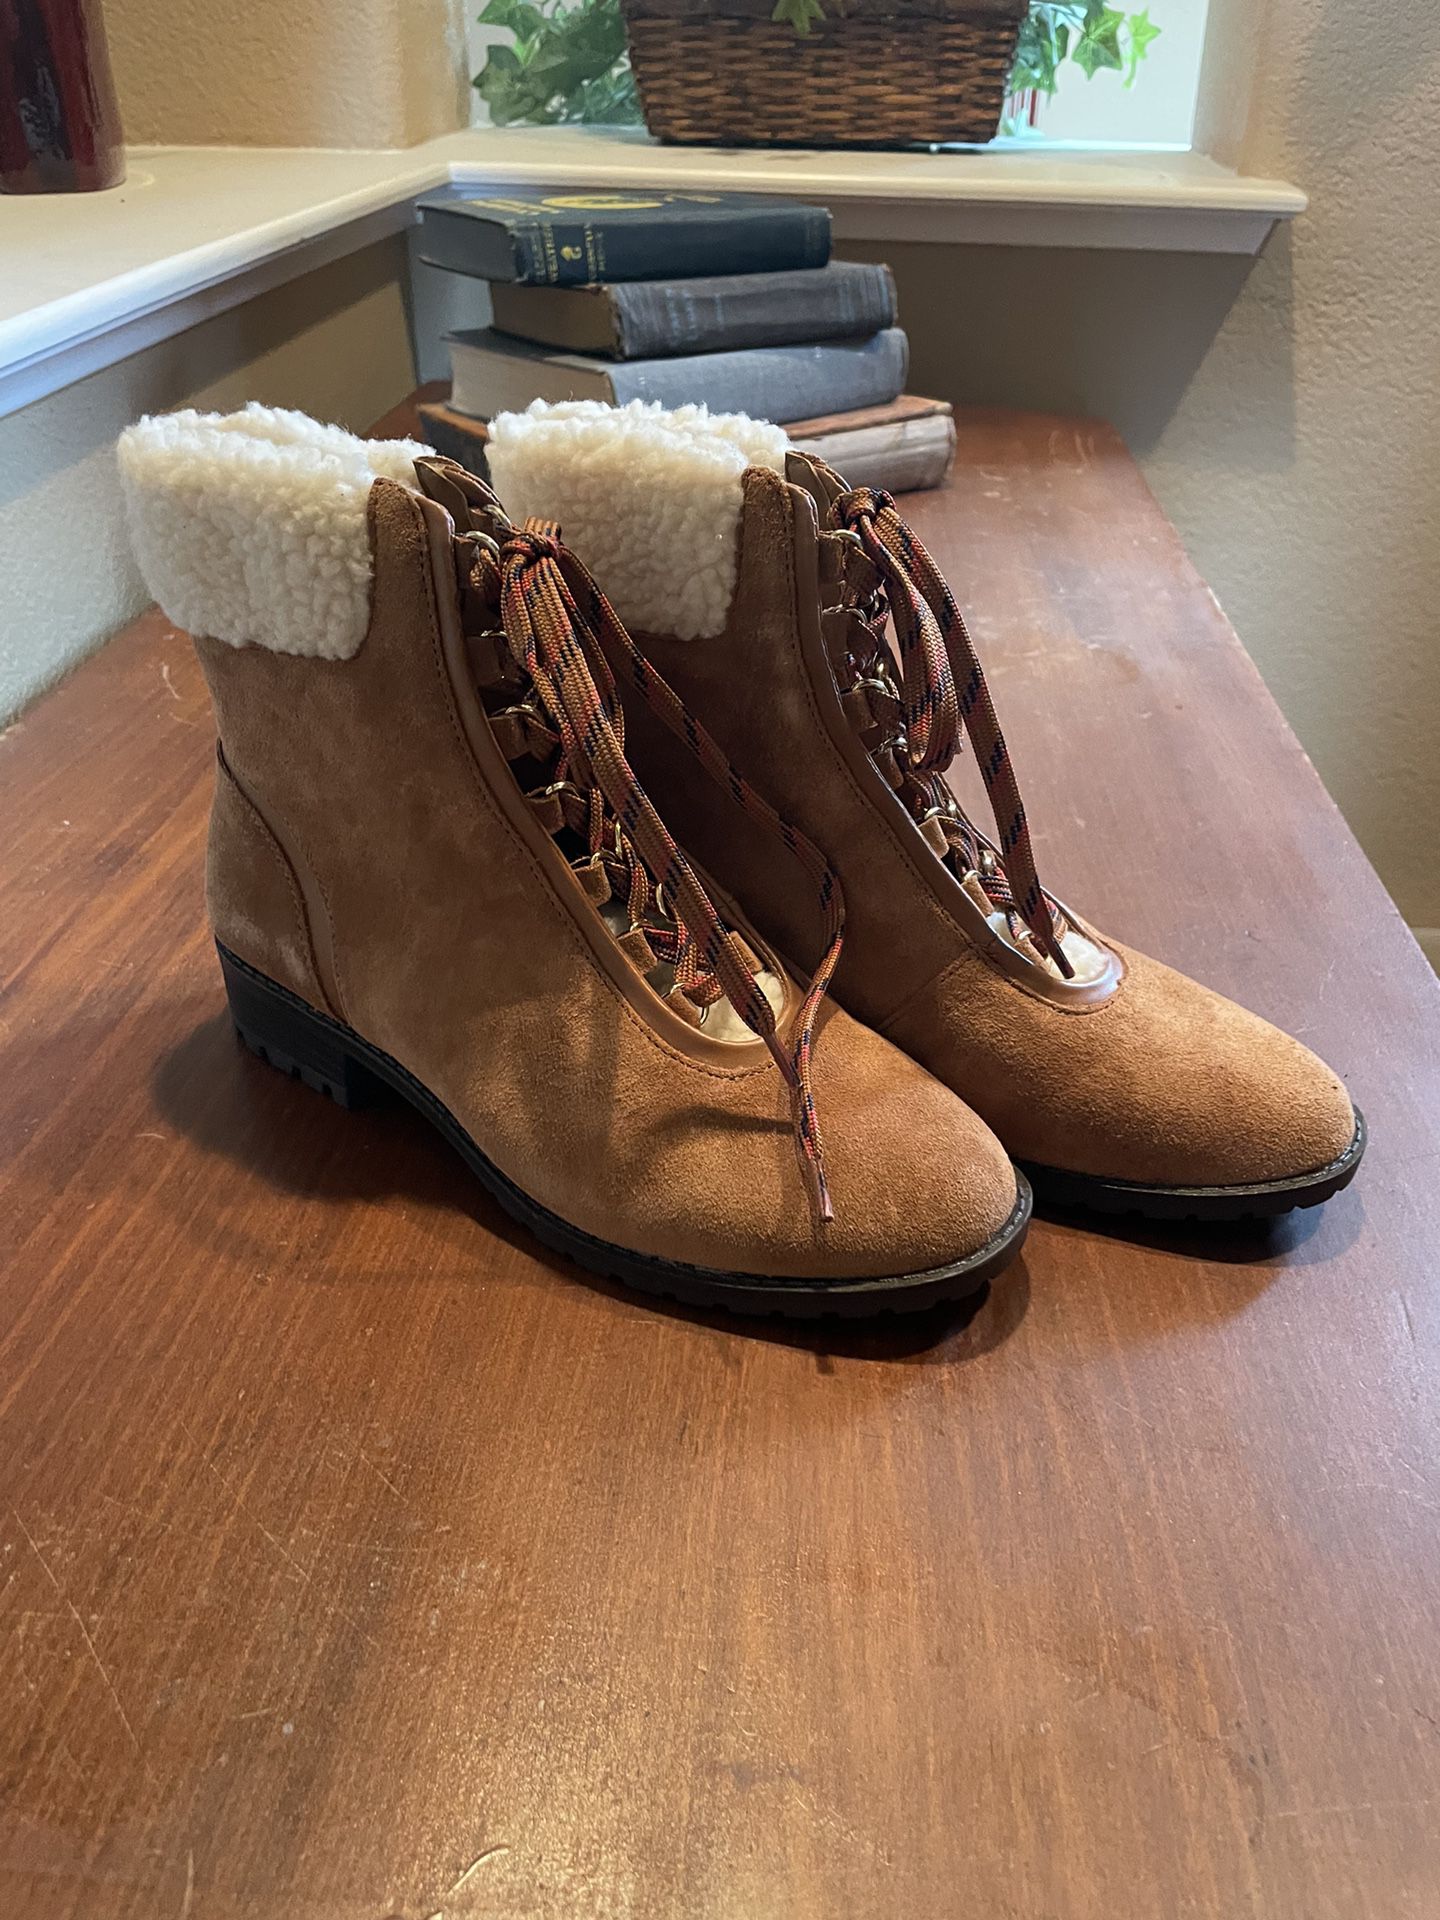  New Crown & Ivy Tan Suede fur boot   Size 7